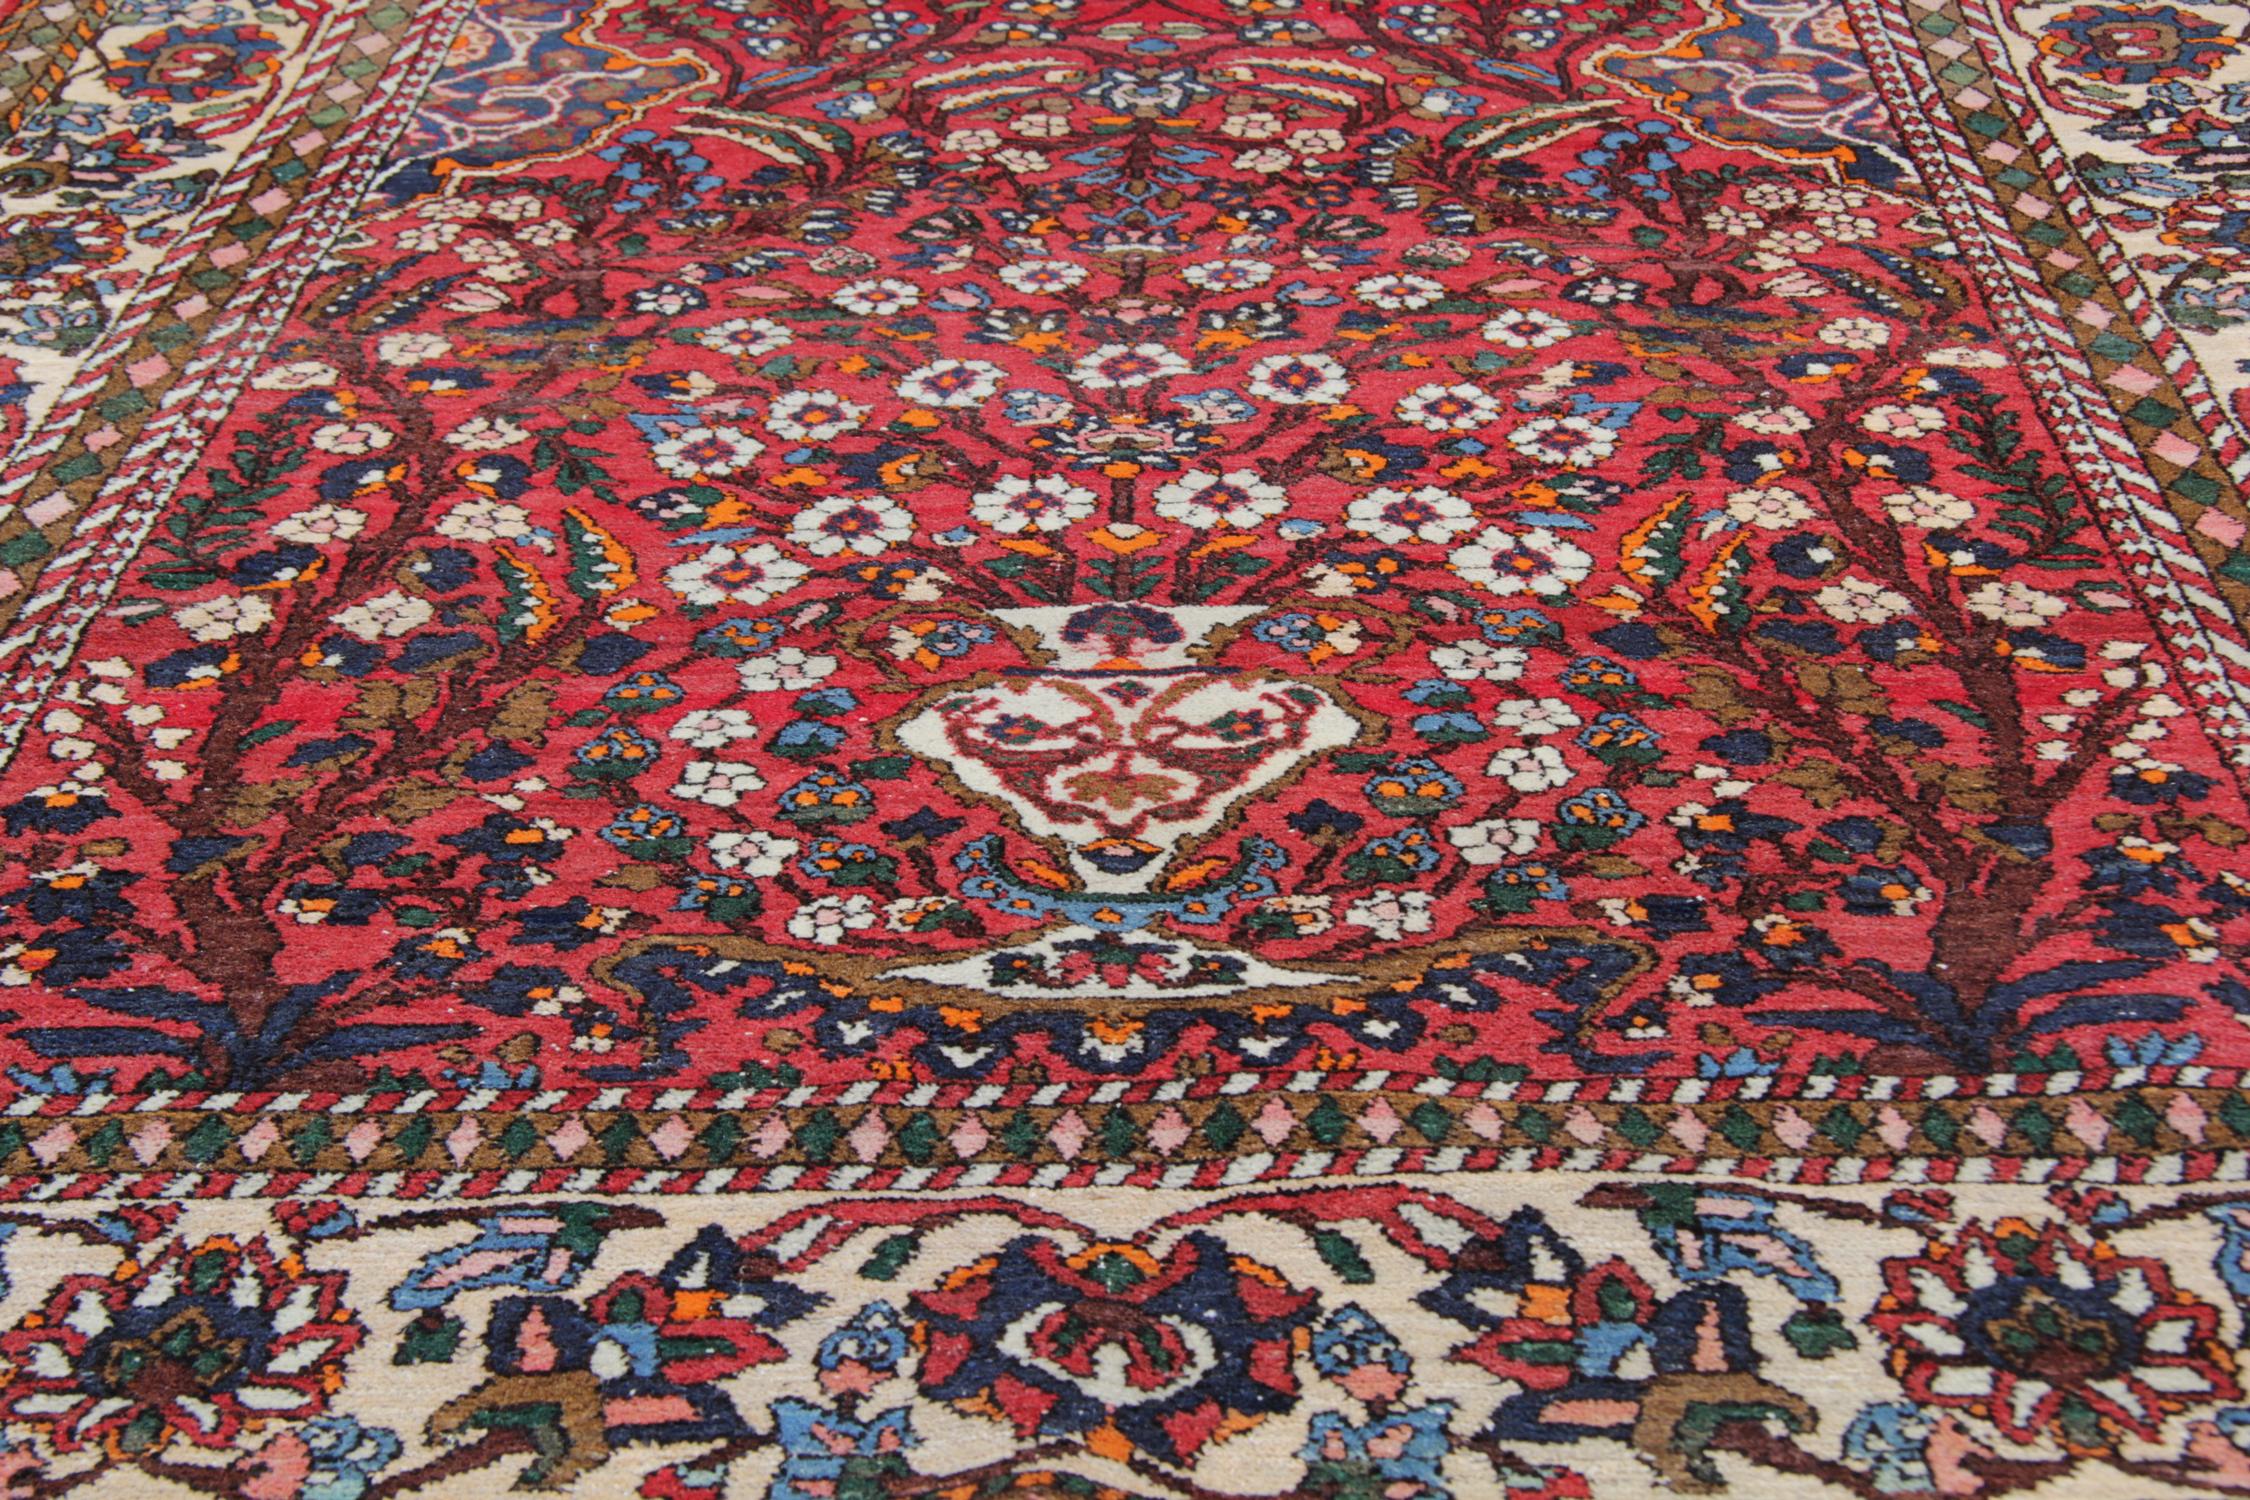 Vegetable Dyed Traditional Red Wool Carpet Handknotted Orienal Antique Area Rug For Sale